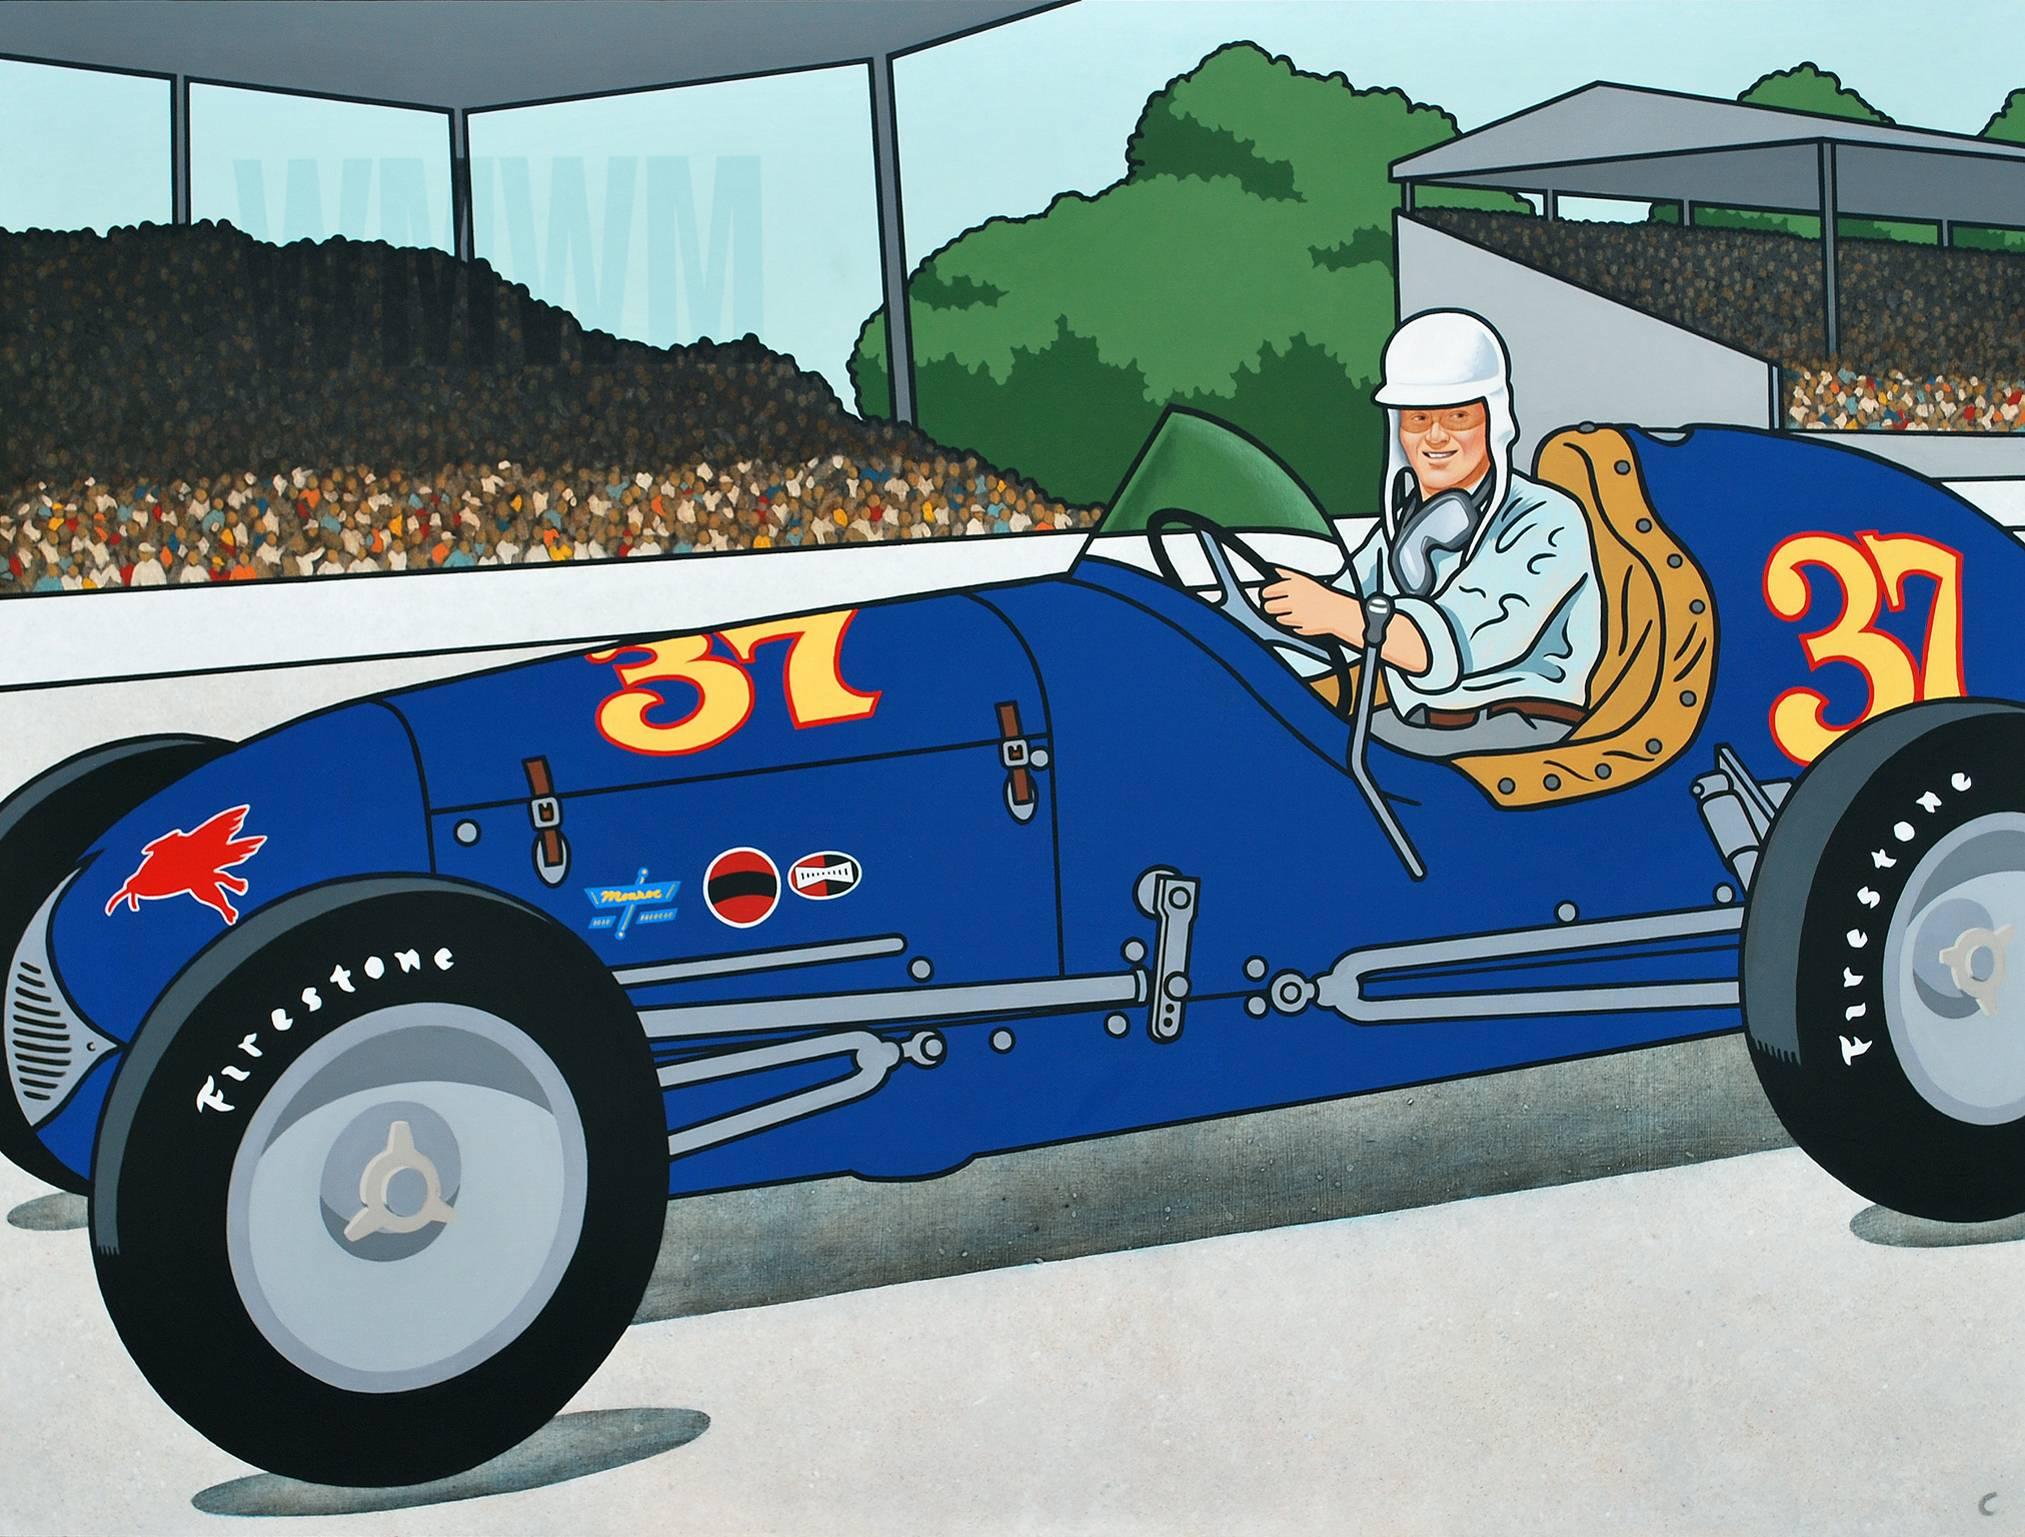 WMWM (blue race car with driver) - Painting by Steve Carver